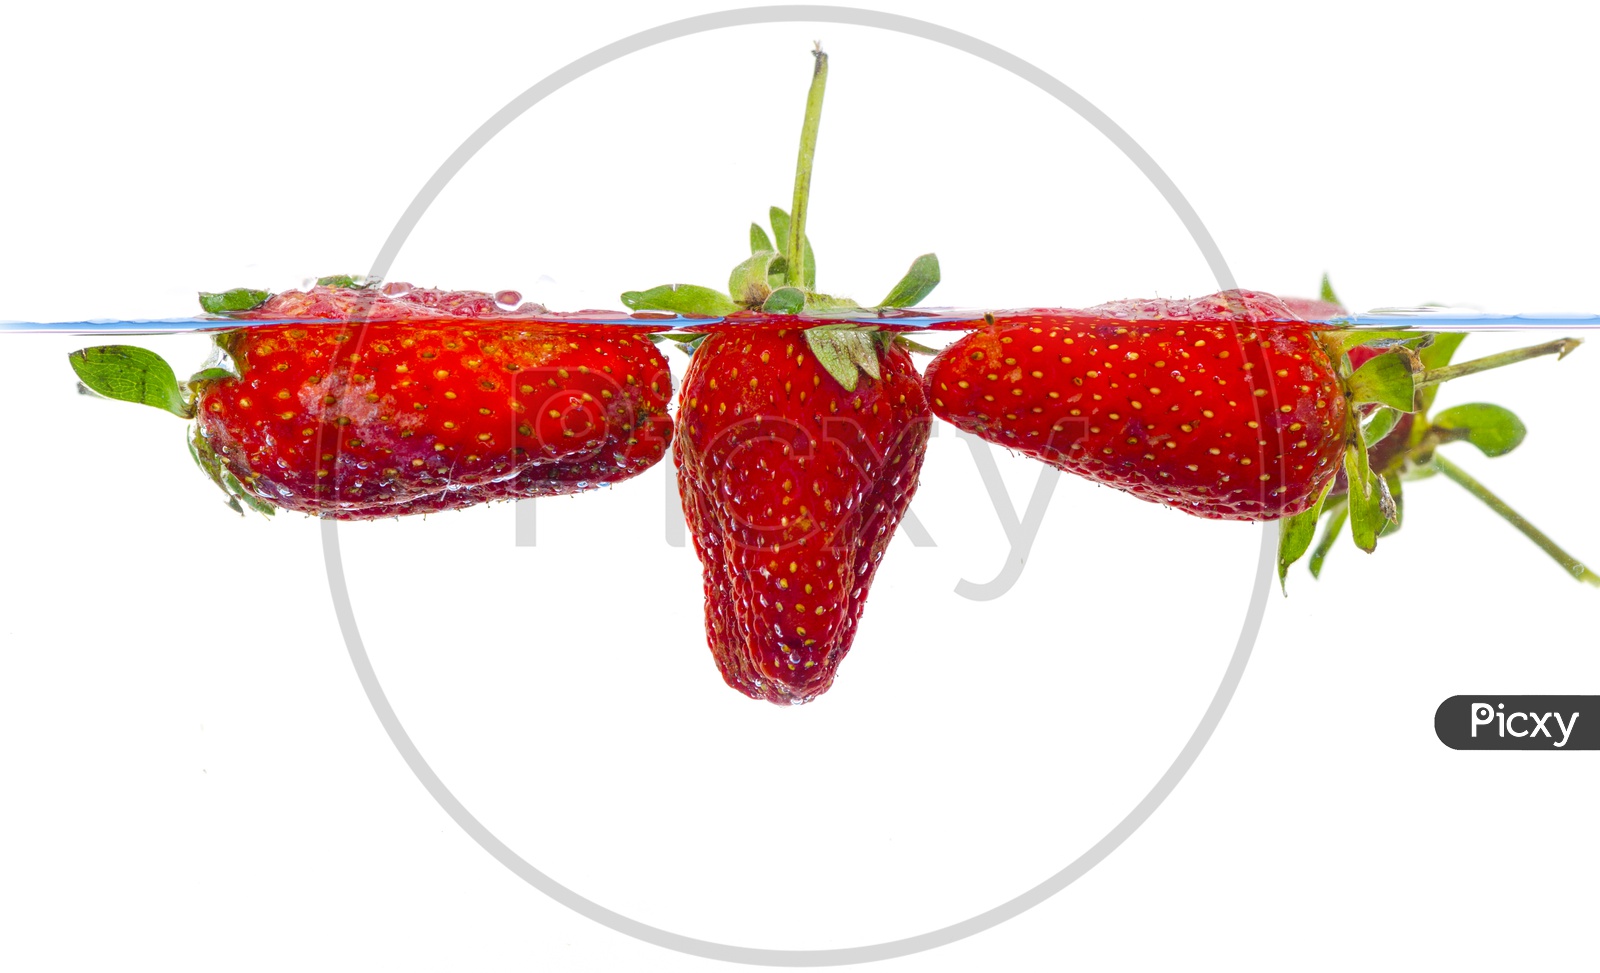 Fresh Strawberries Dropped Into Water With Splash  Over an Isolated White Background